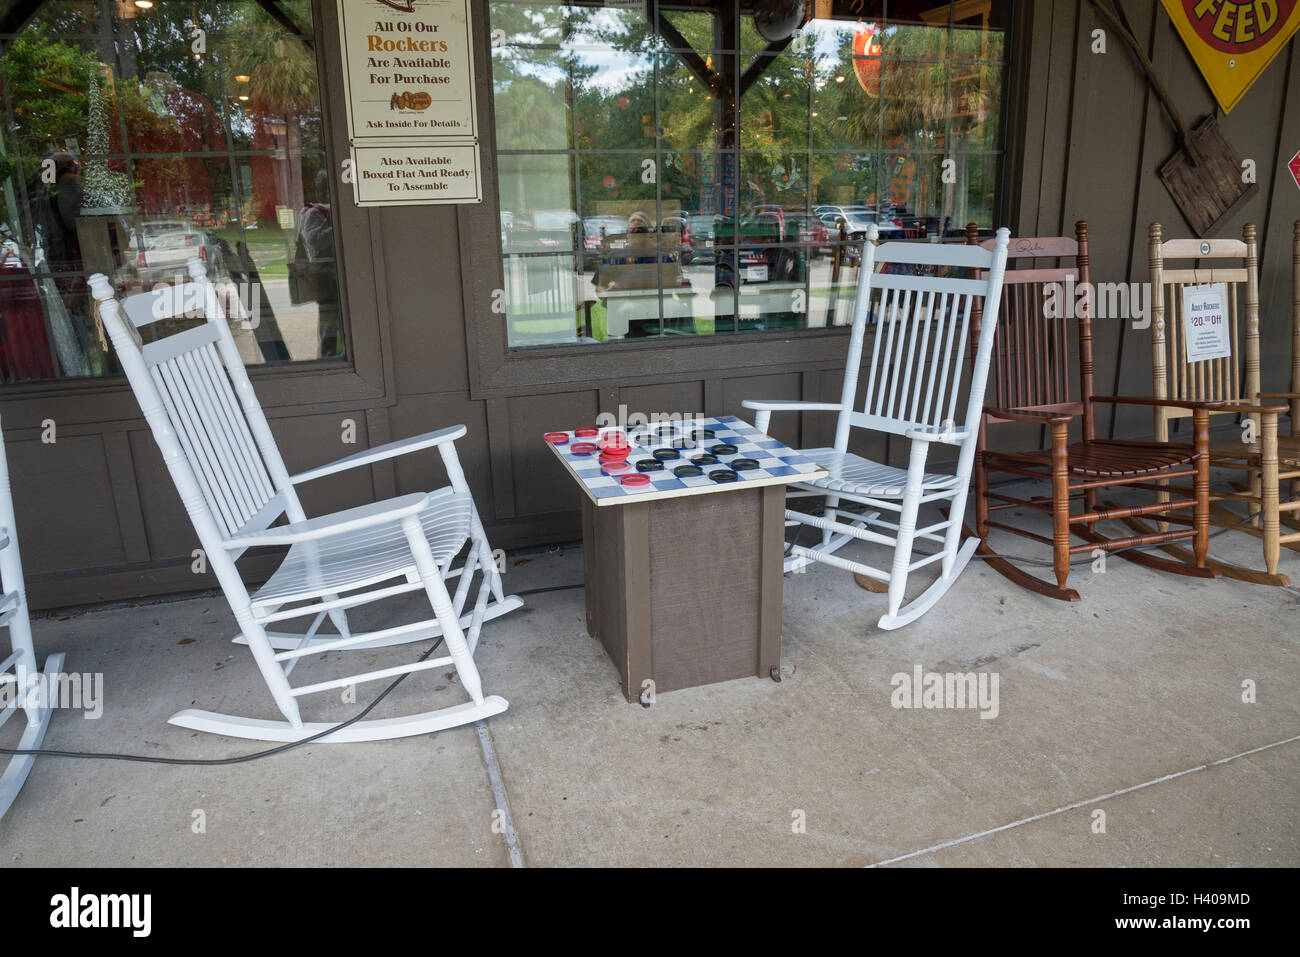 Giant checker set with rocking chairs in front of a Cracker Barrel restaurant. Stock Photo